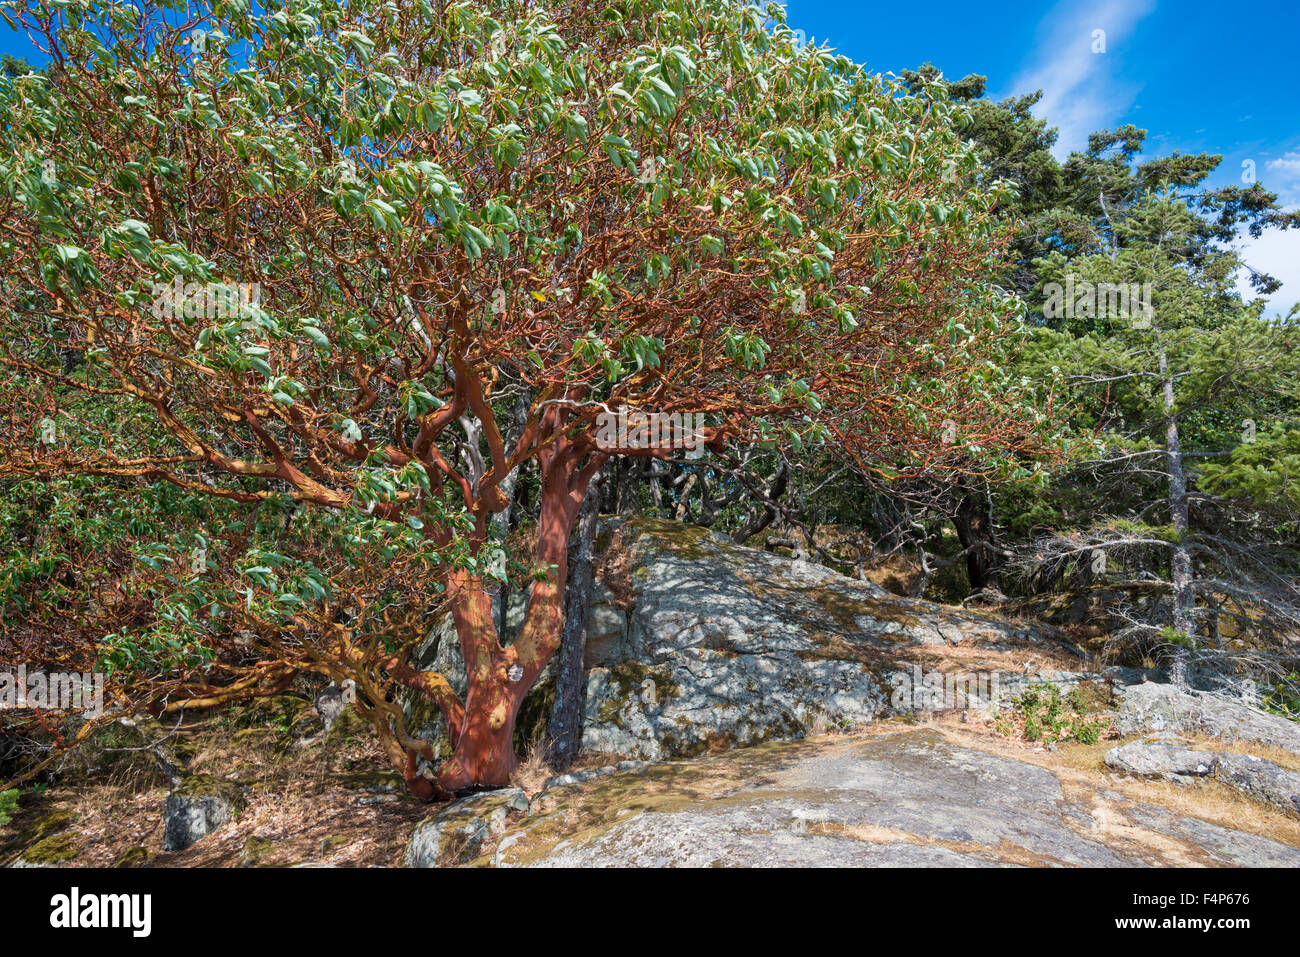 Arbutus tree, Arbutus menziesii, on an exposed rocky bluff at the Fort Rodd Hill National Historic Site, near Victoria BC Stock Photo